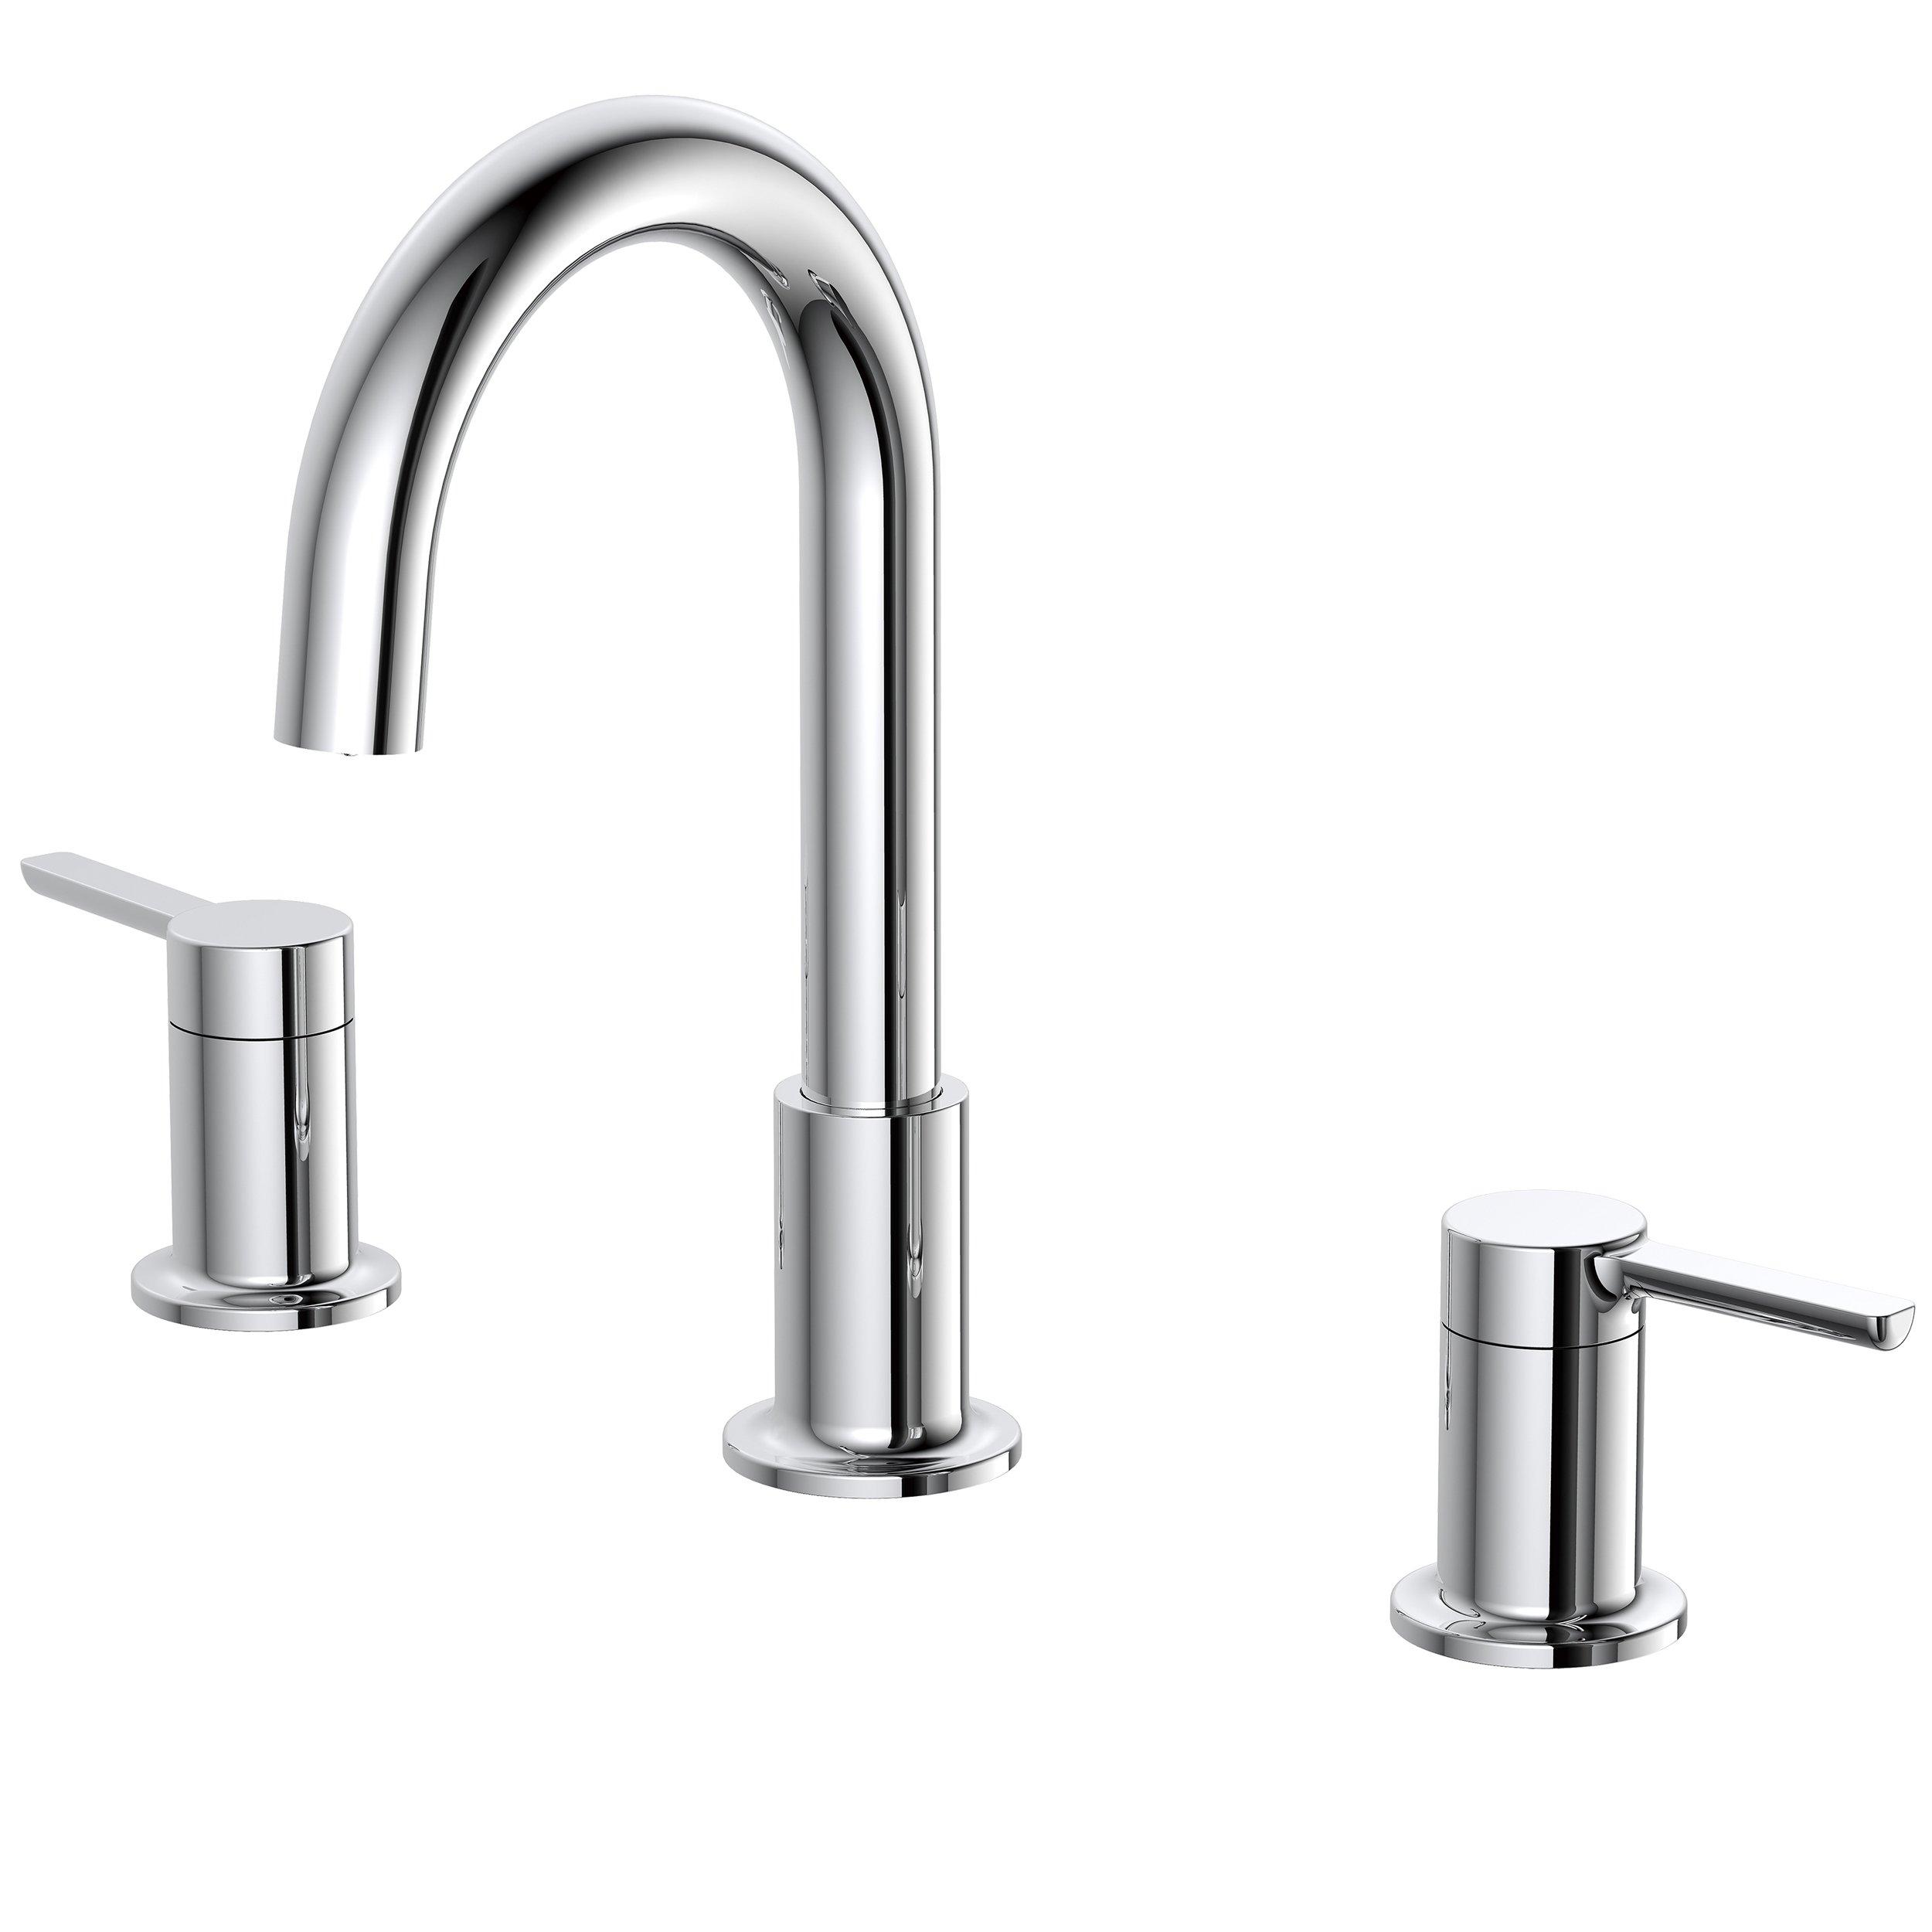 Rhiver 8 in. Widespread Chrome Faucet